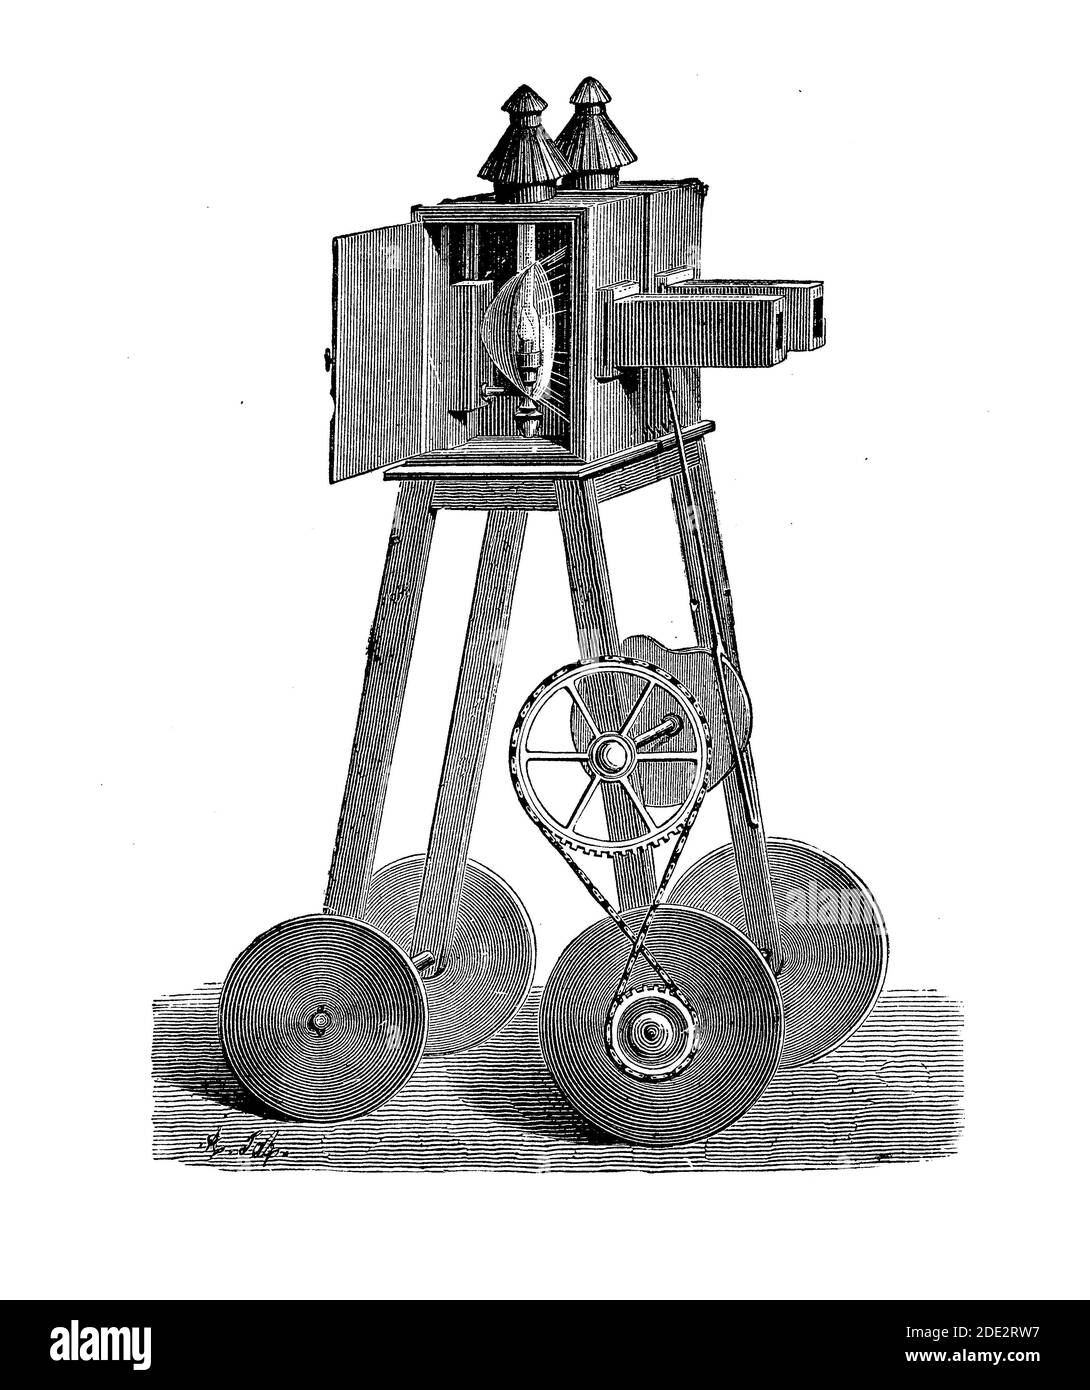 The magic lantern early image projector using a concave mirror behind a light source to direct the light through a small slide with the image to be projected Stock Photo